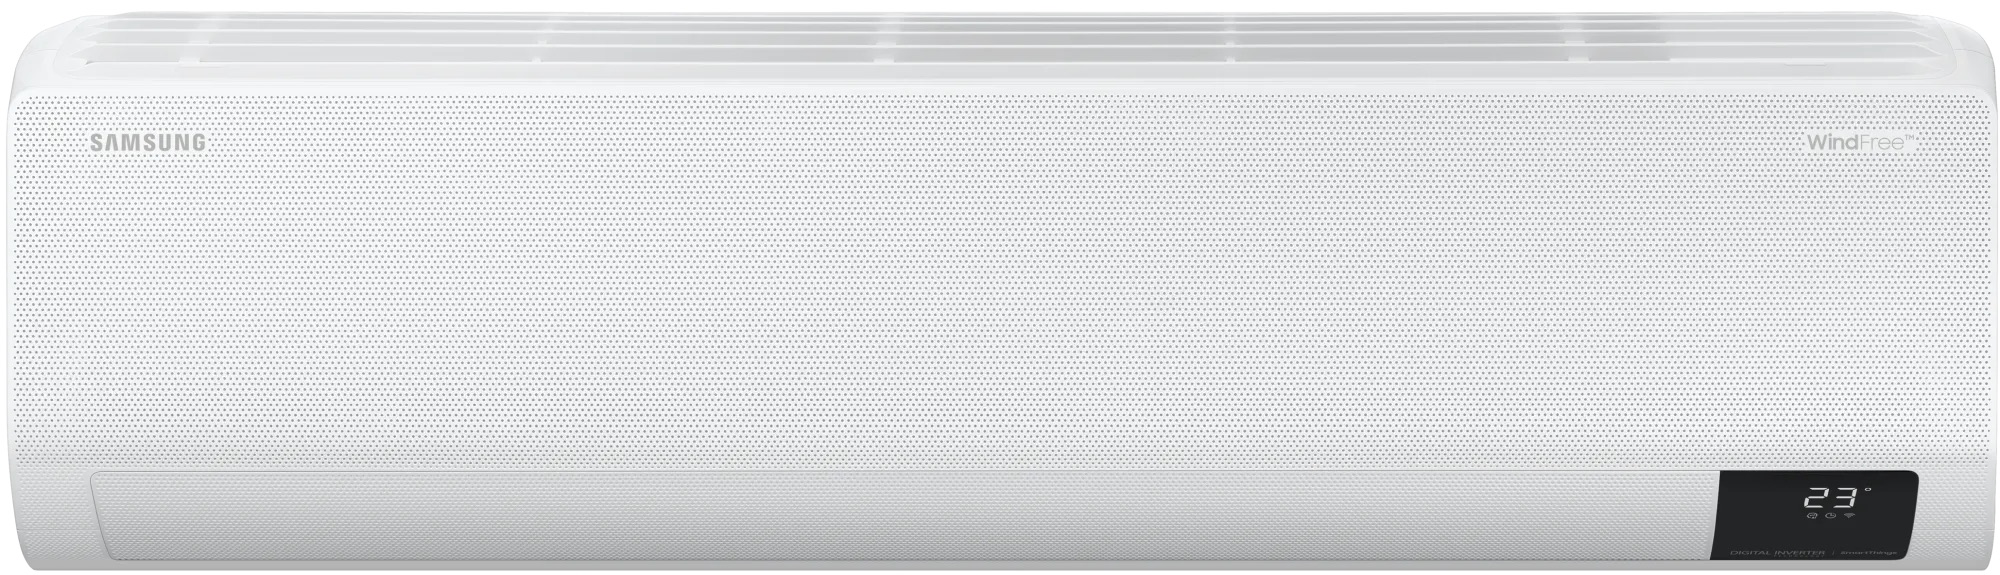 Samsung Ductless System